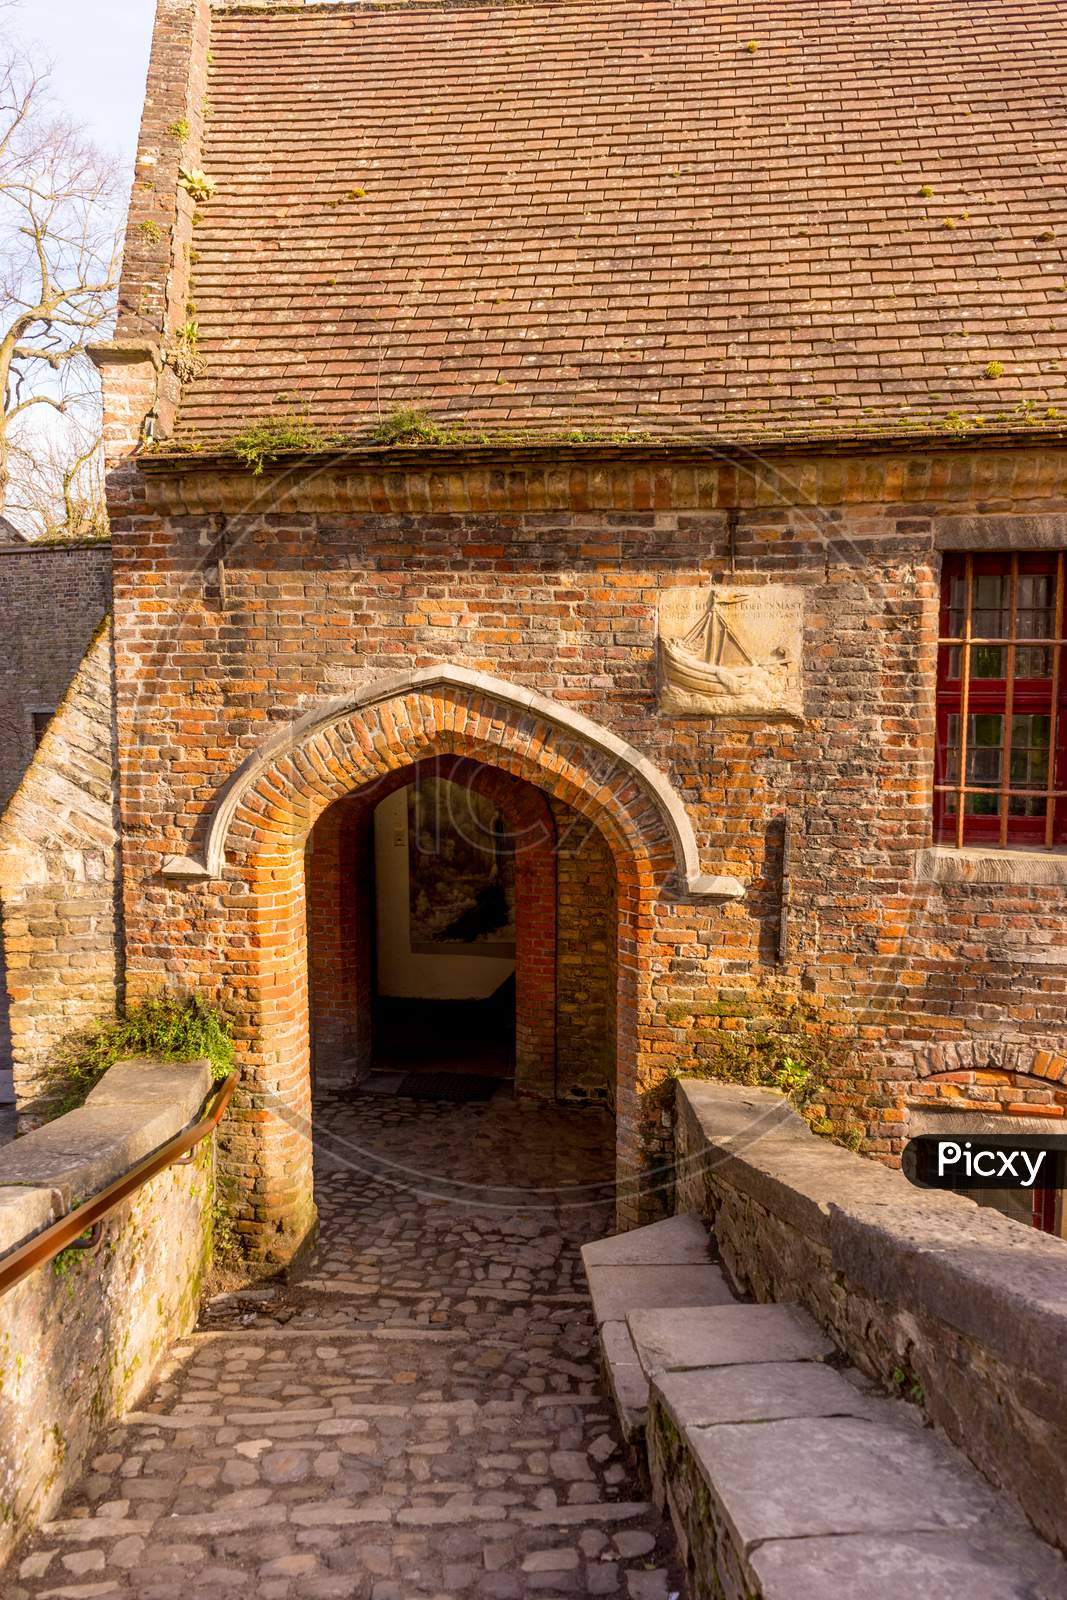 Belgium, Bruges, A Stone Building That Has A Bench In Front Of A Brick Wall